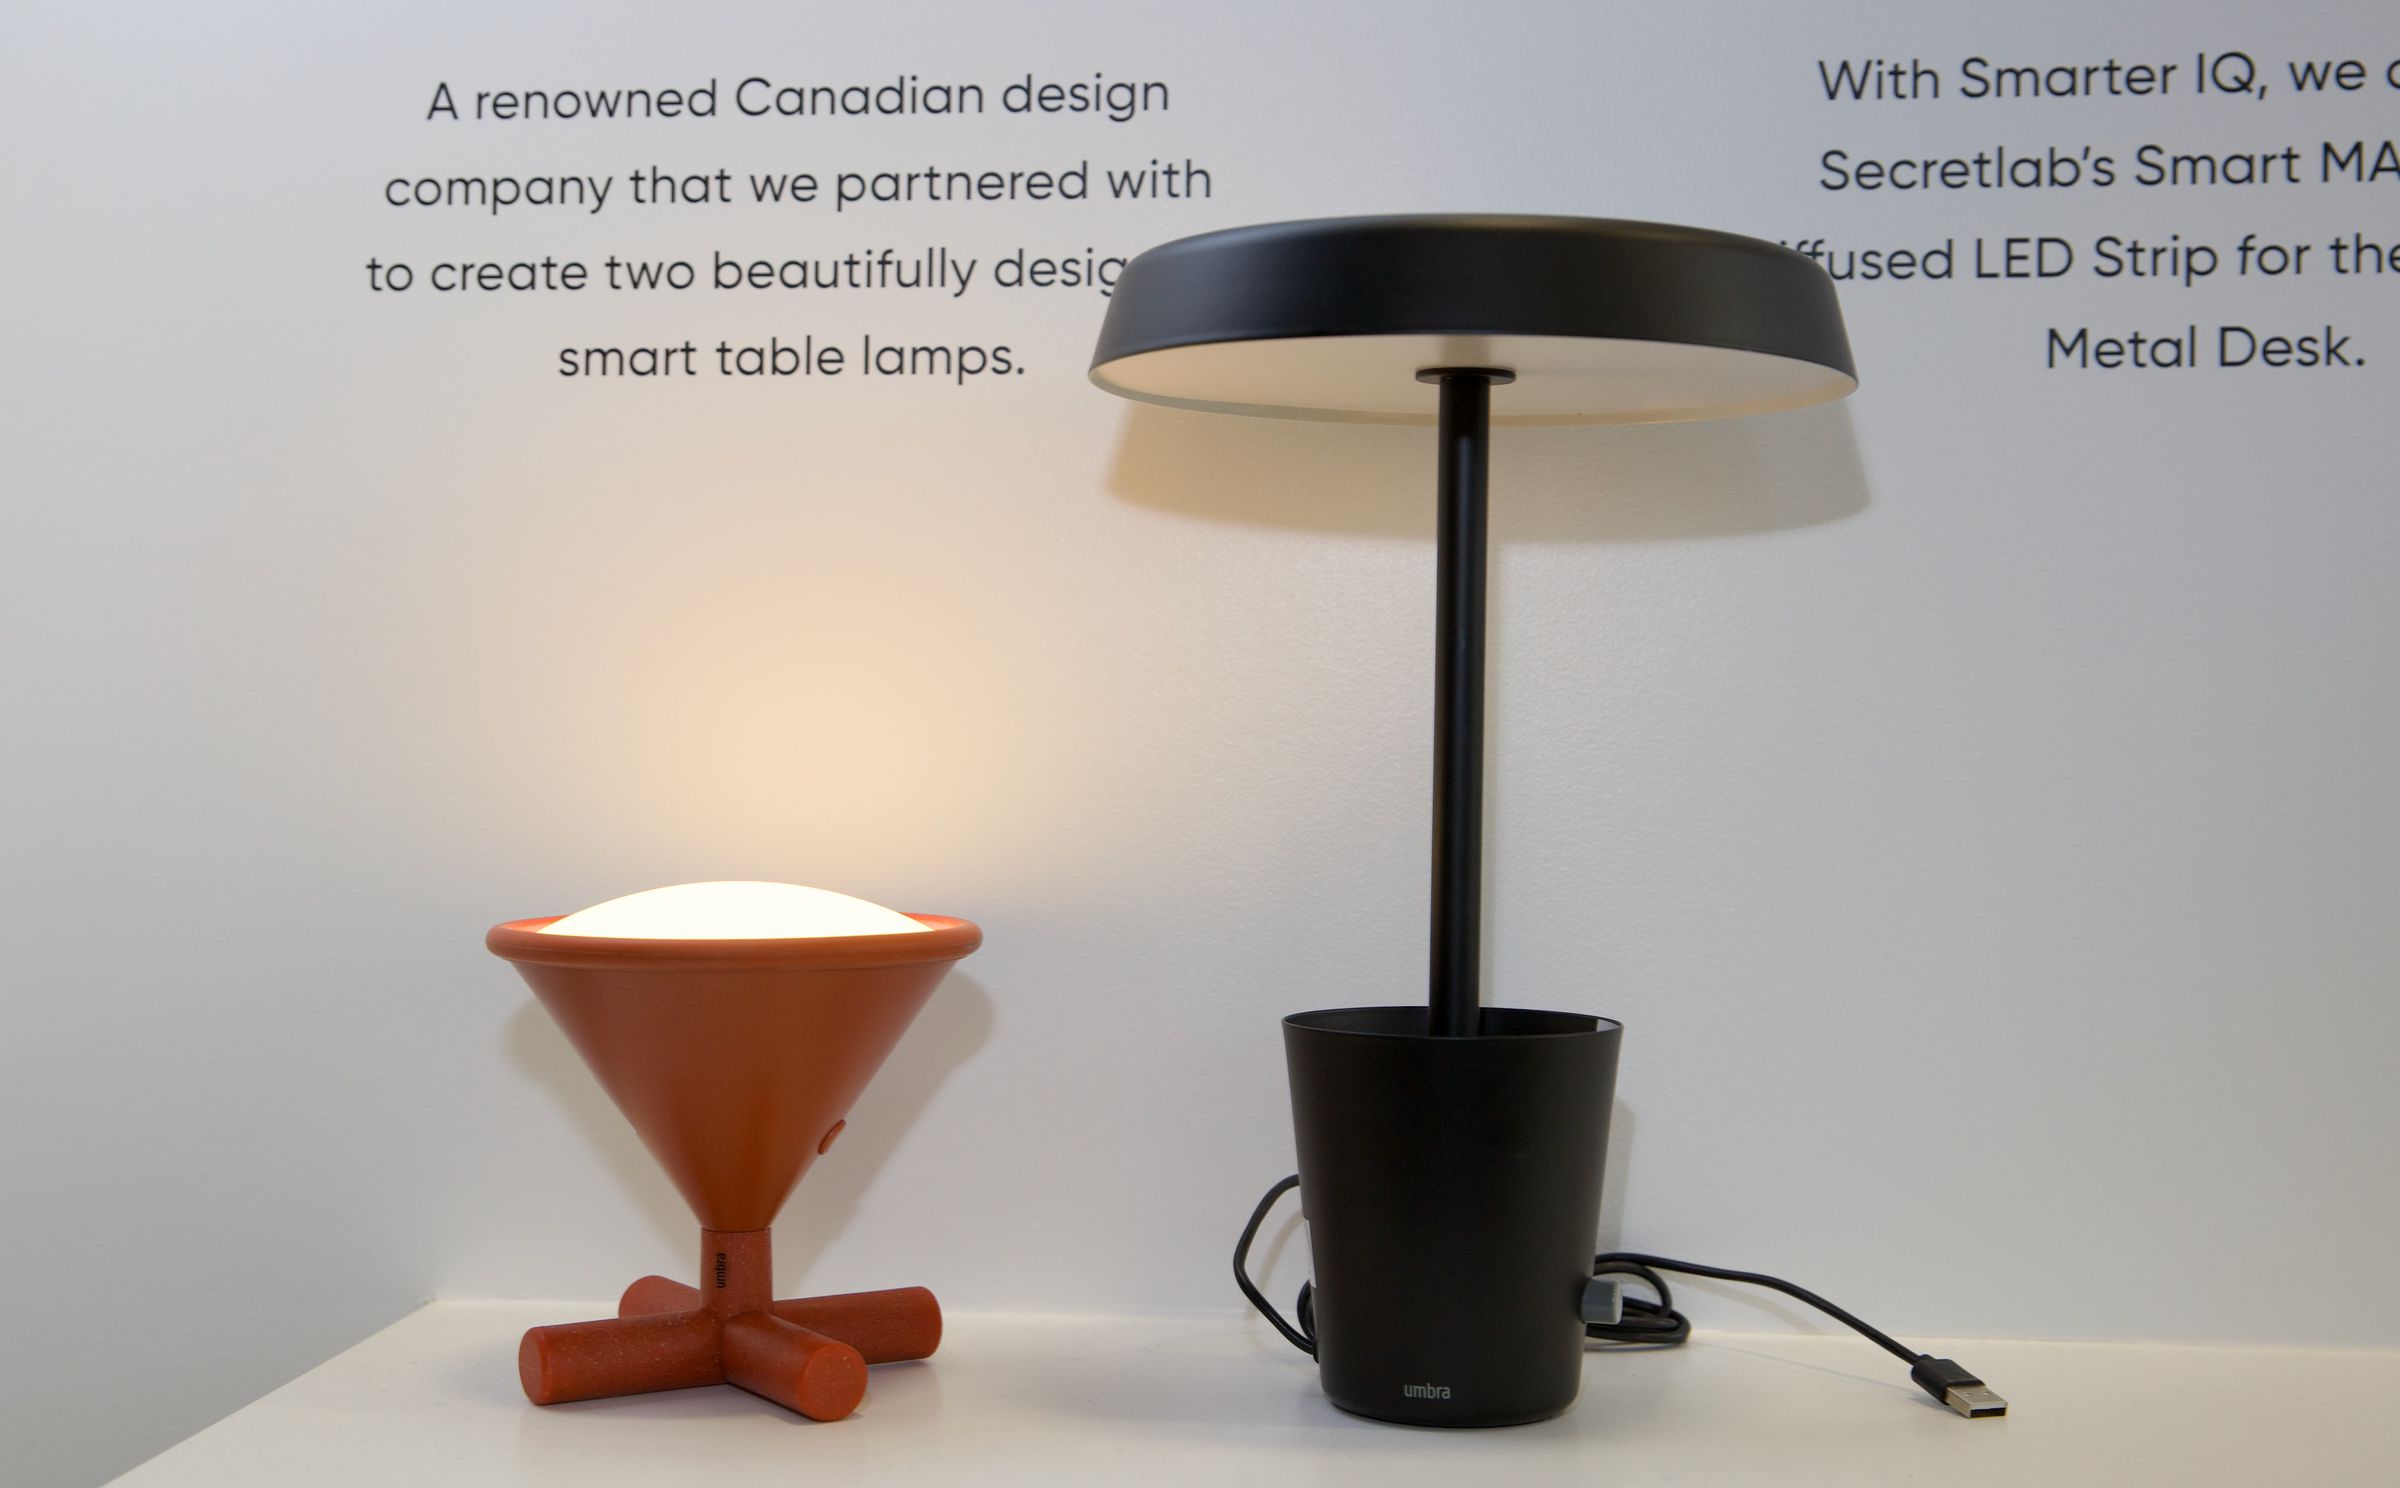 This Umbra x Nanoleaf collab desk lamp (right) will look very good in my home office!